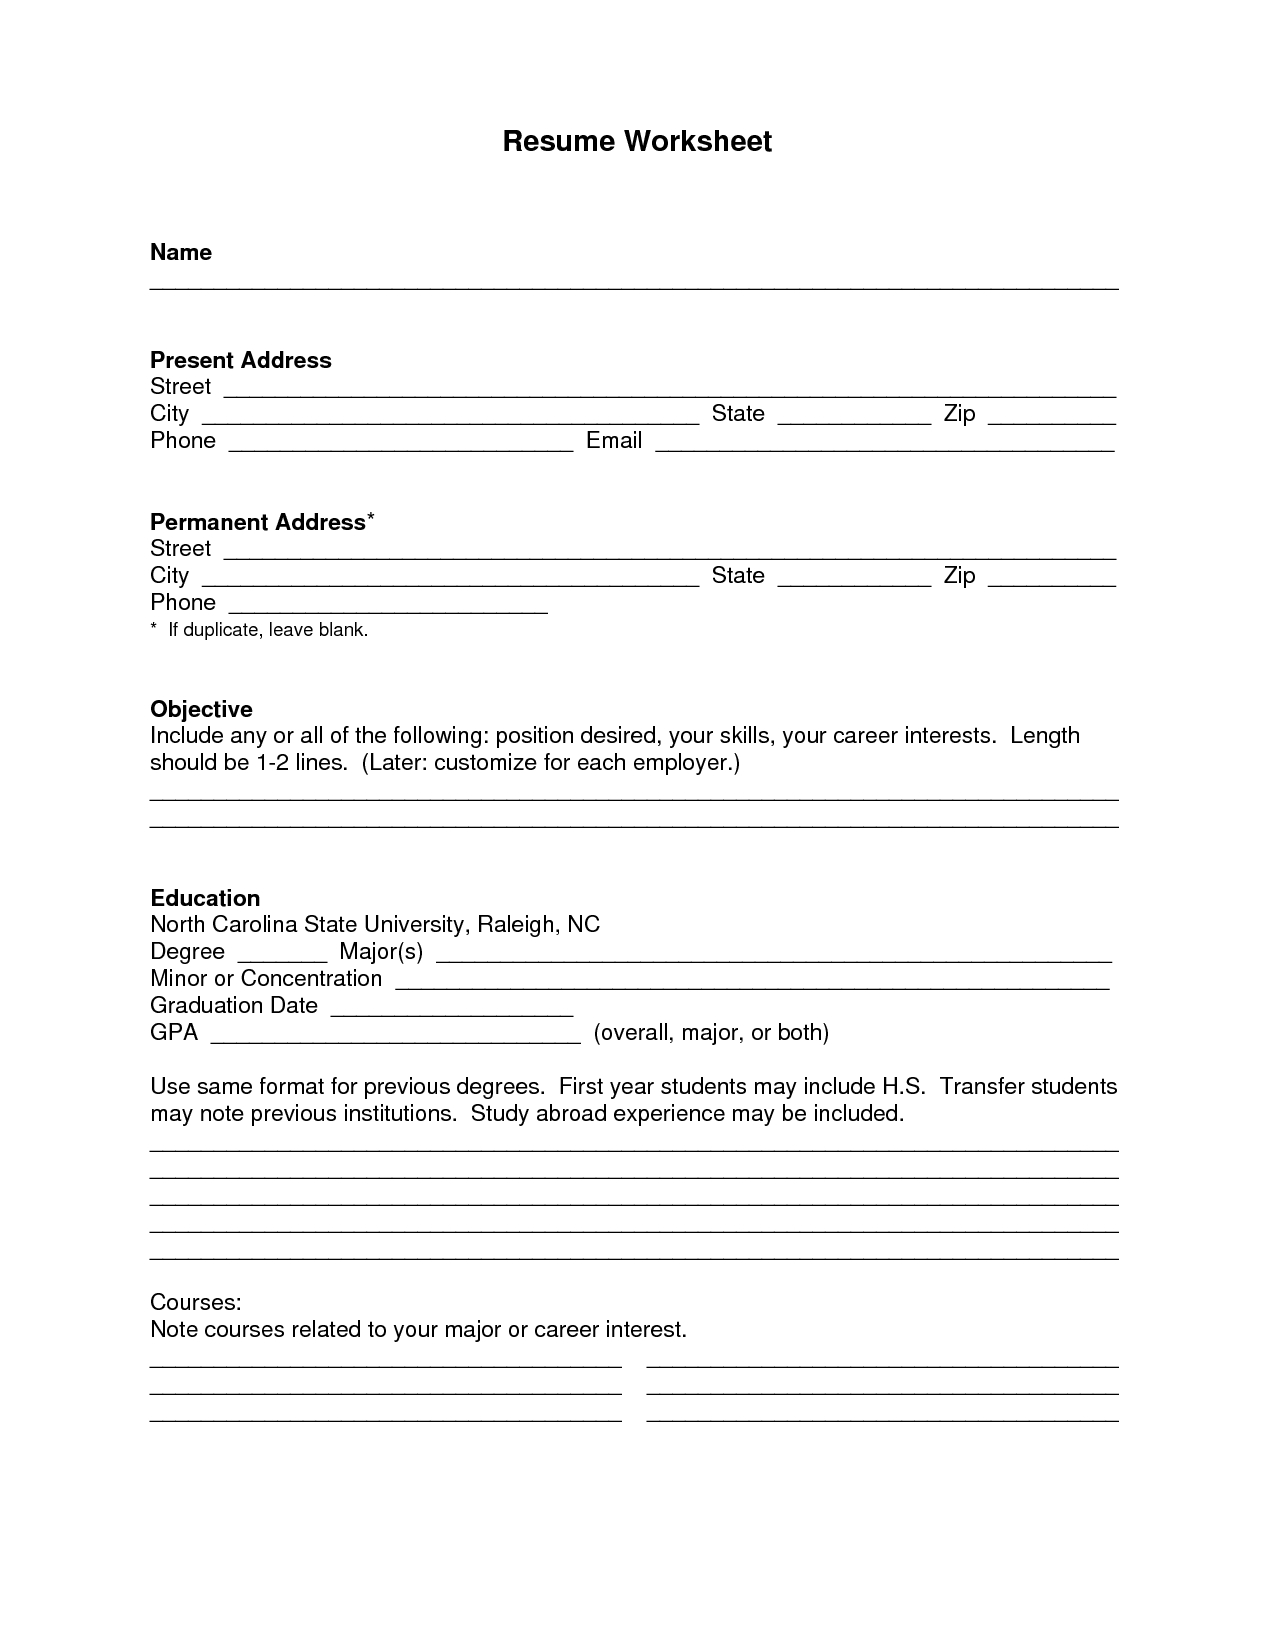 Free Printable Resume Template Builder - The Online Resume Builder - Free Online Printable Resume Forms